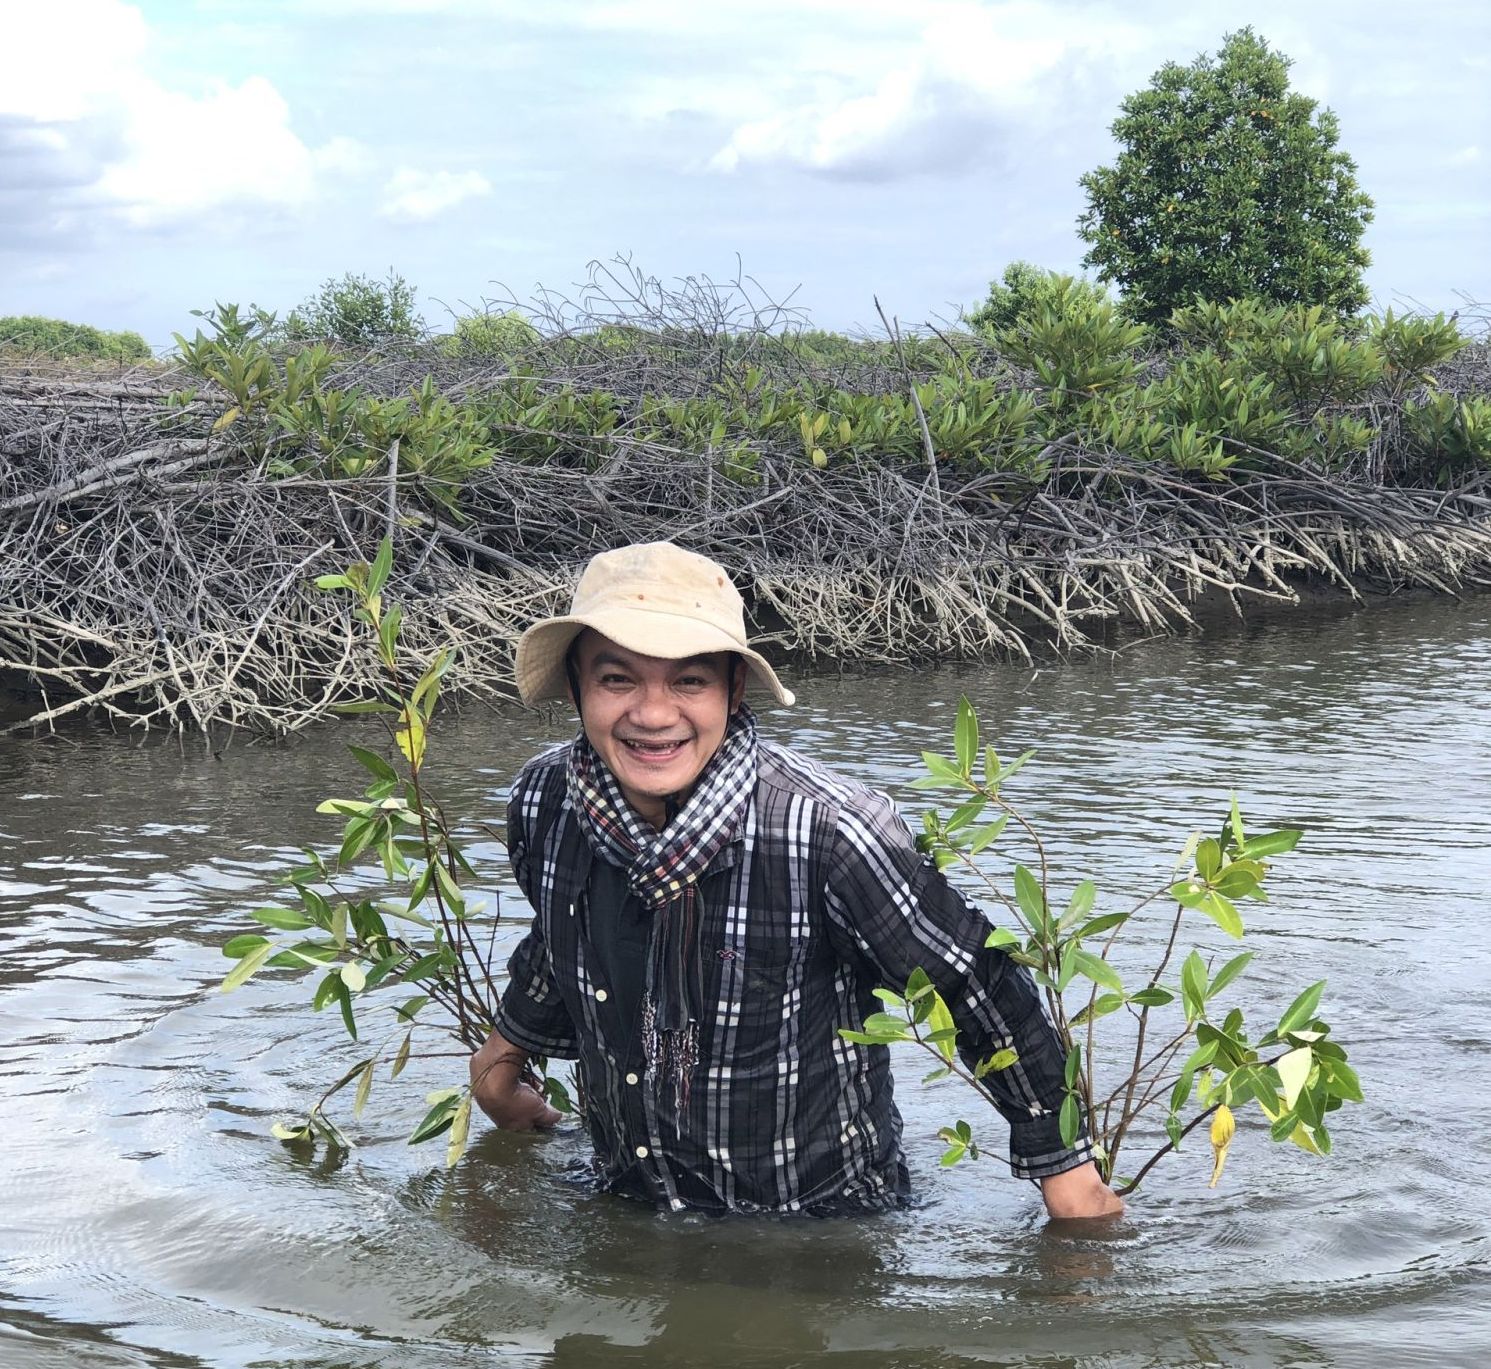 An IUCN staff joined the mangrove planting after the launch in Dat Moi Village, Ca Mau Province